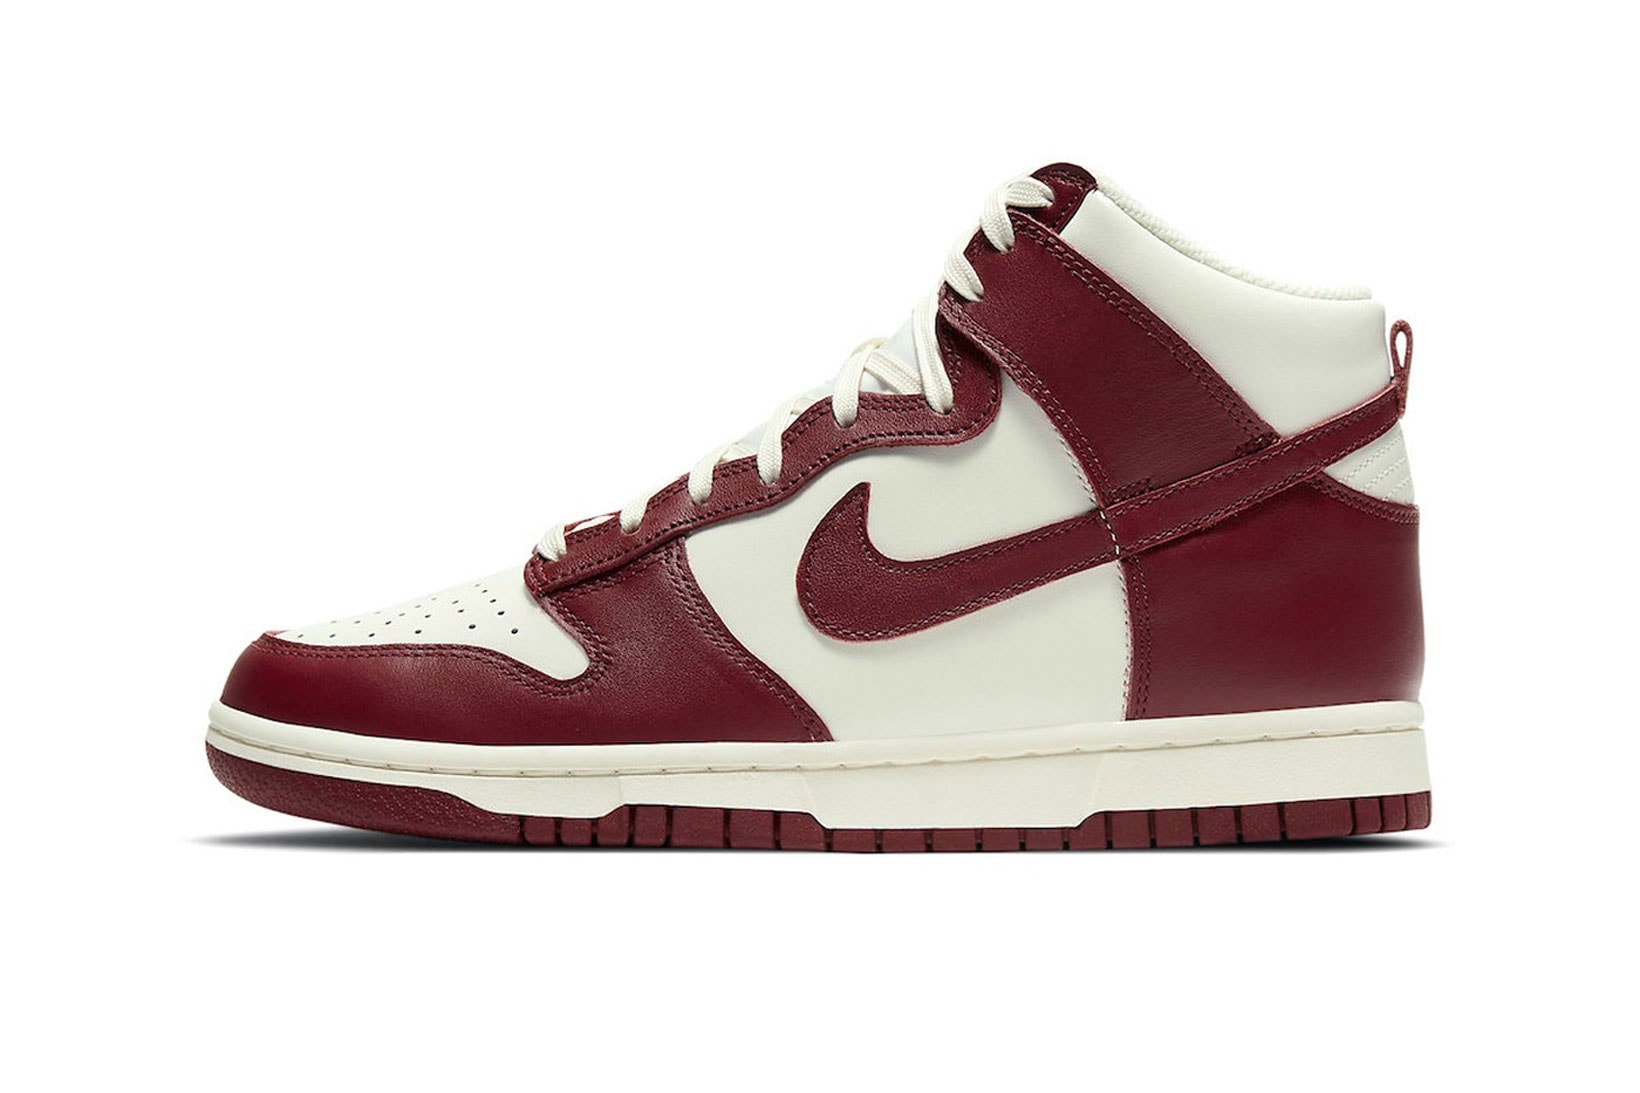 nike dunk high team red white sneakers lateral swoosh details